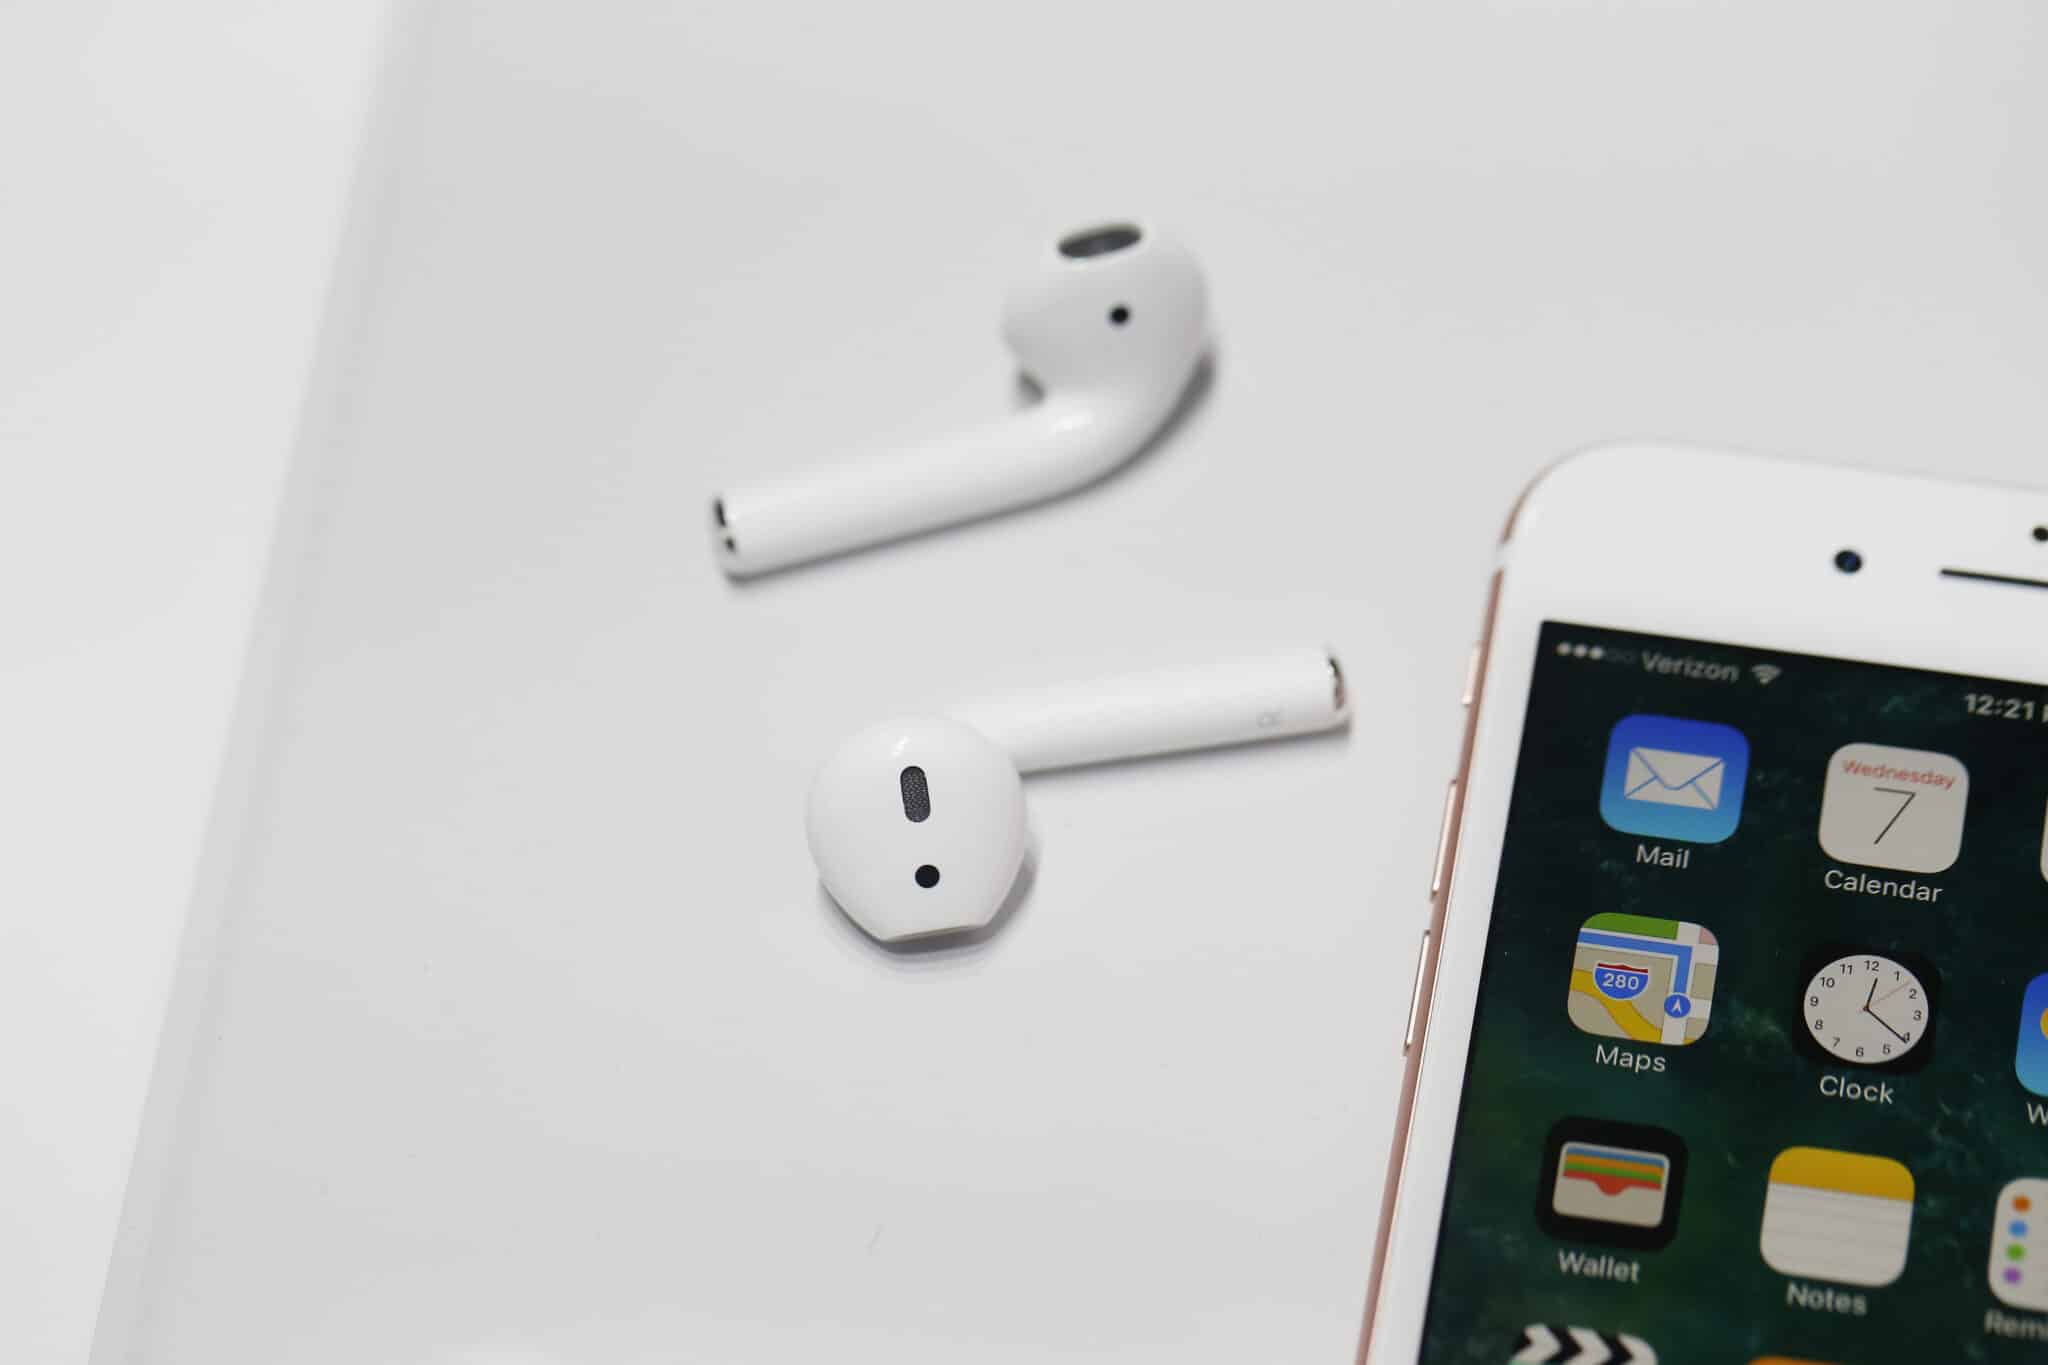 SAN FRANCISCO, CA - SEPTEMBER 07: A pair of the new Apple AirPods are seen during a launch event on September 7, 2016 in San Francisco, California. Apple Inc. unveiled the latest iterations of its smart phone, the iPhone 7 and 7 Plus, the Apple Watch Series 2, as well as AirPods, the tech giant's first wireless headphones. (Photo by Stephen Lam/Getty Images)